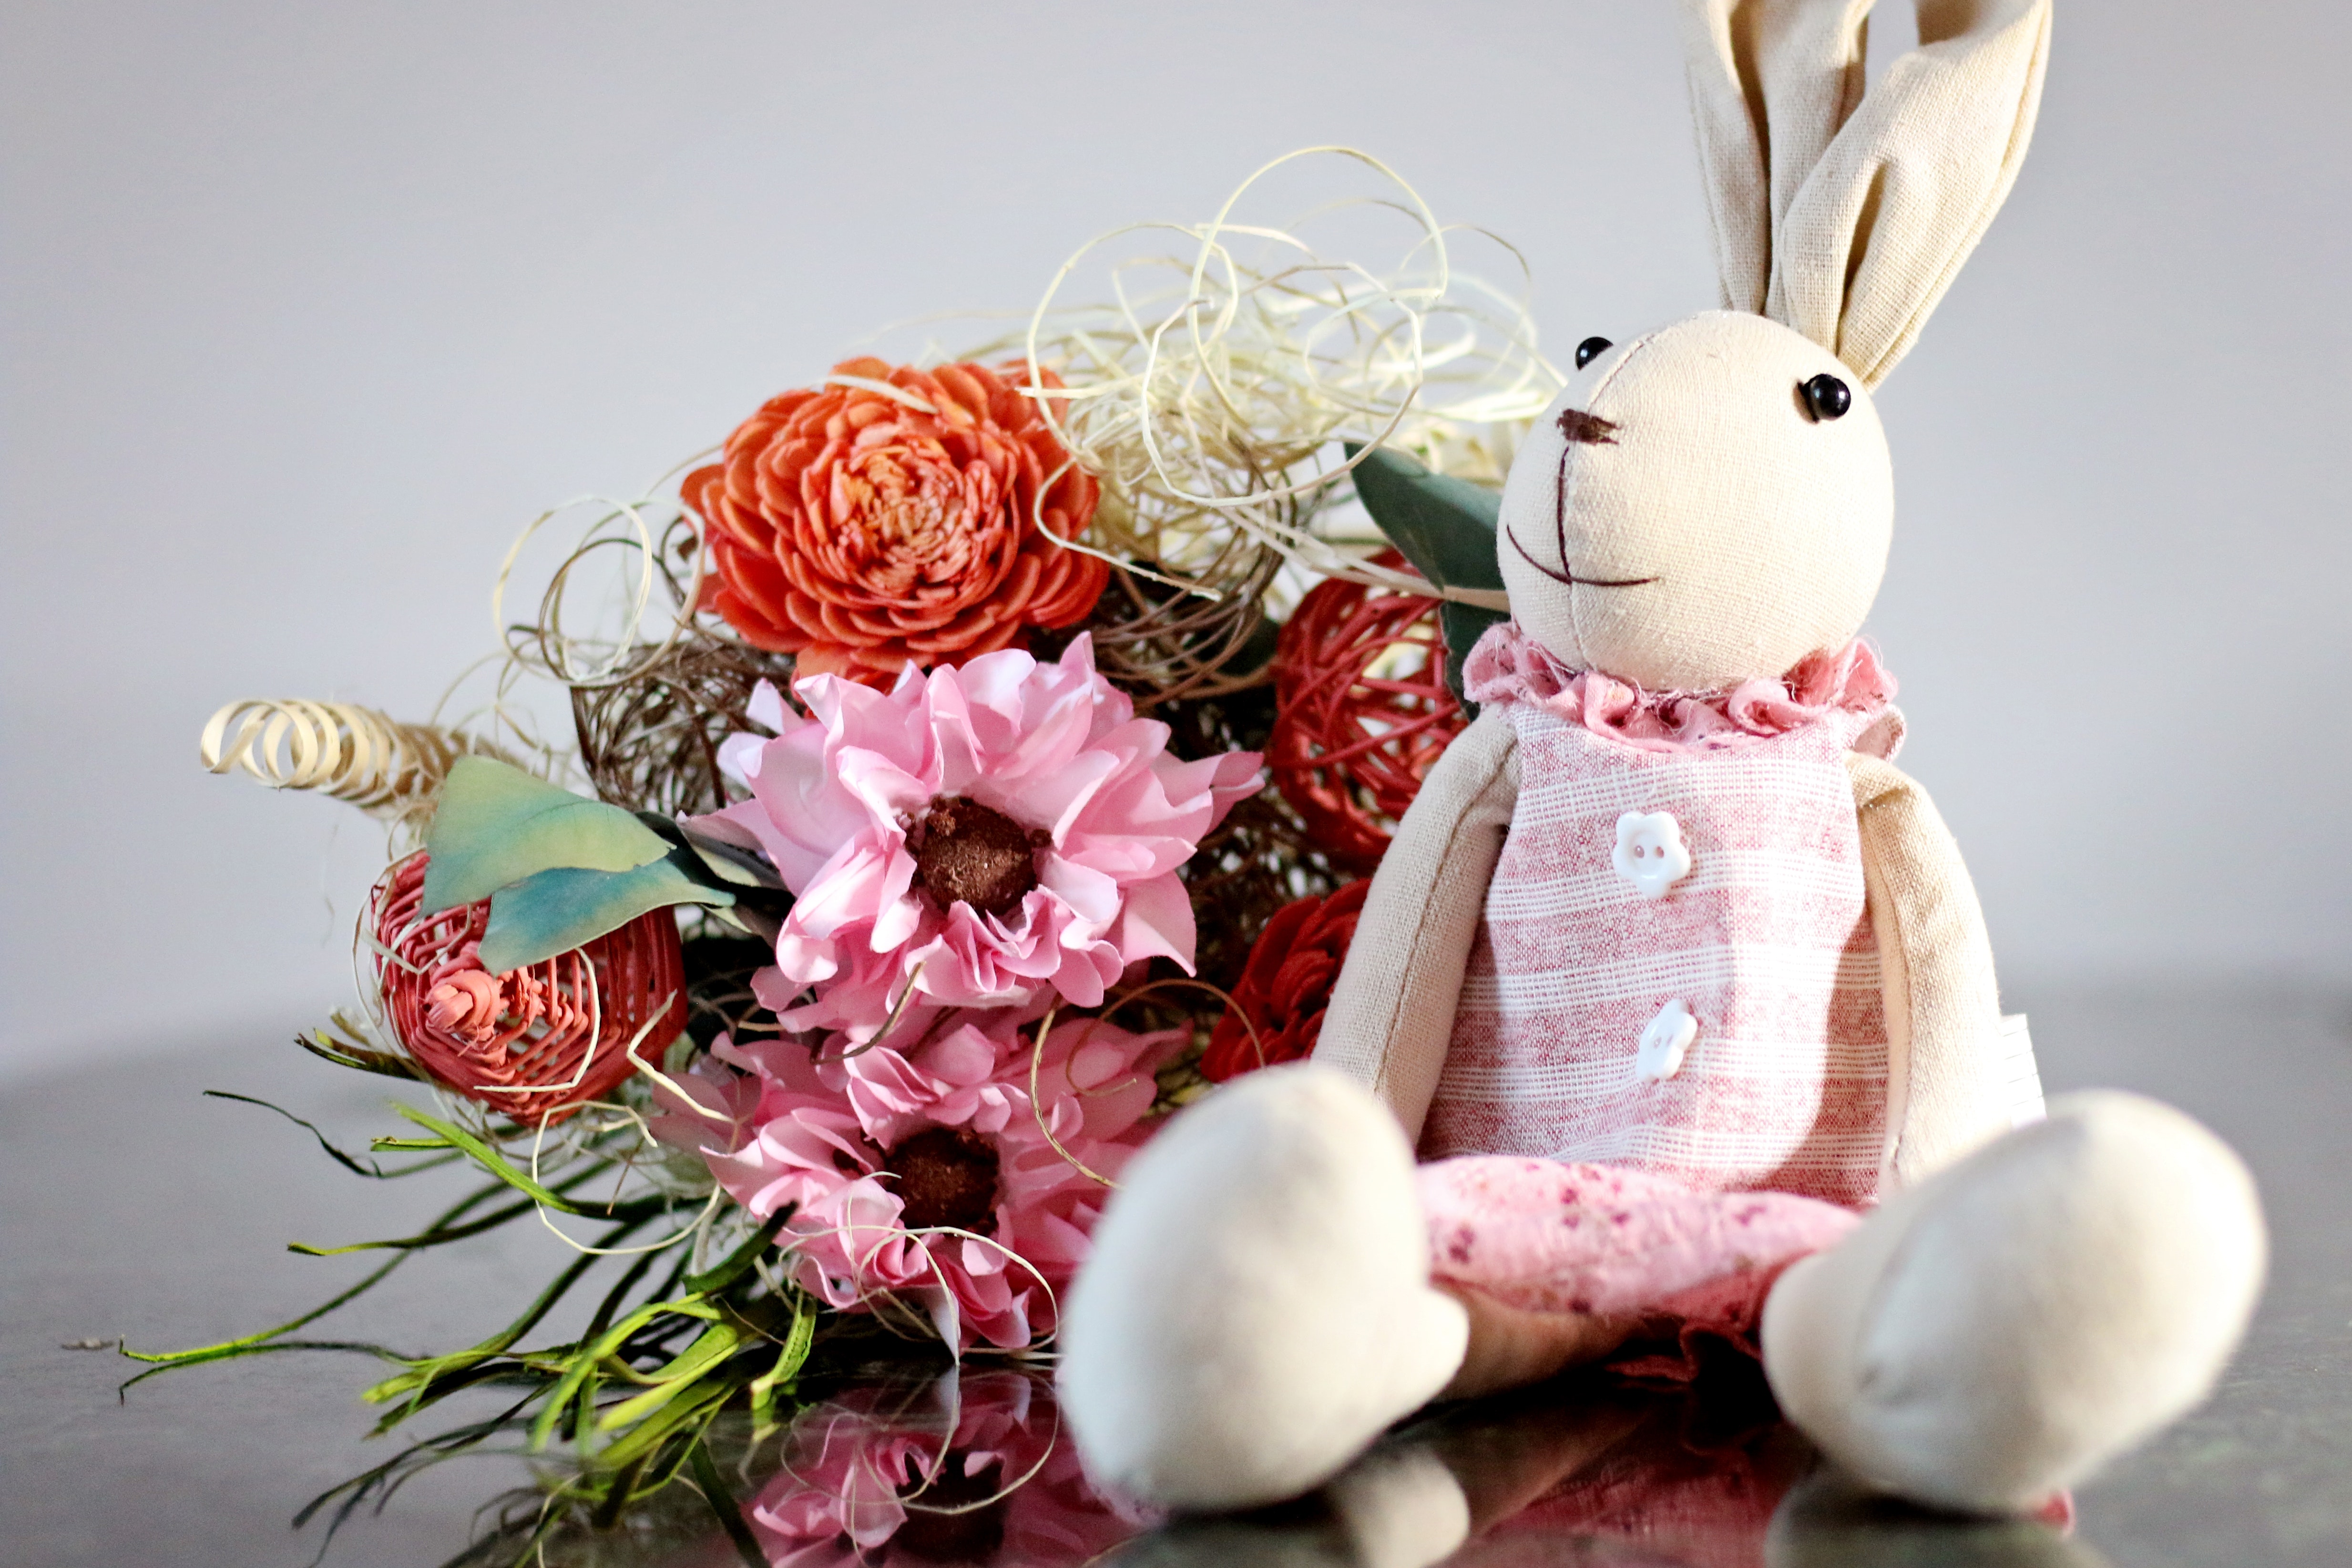 Beige bunny plush toy with pink cloth photo